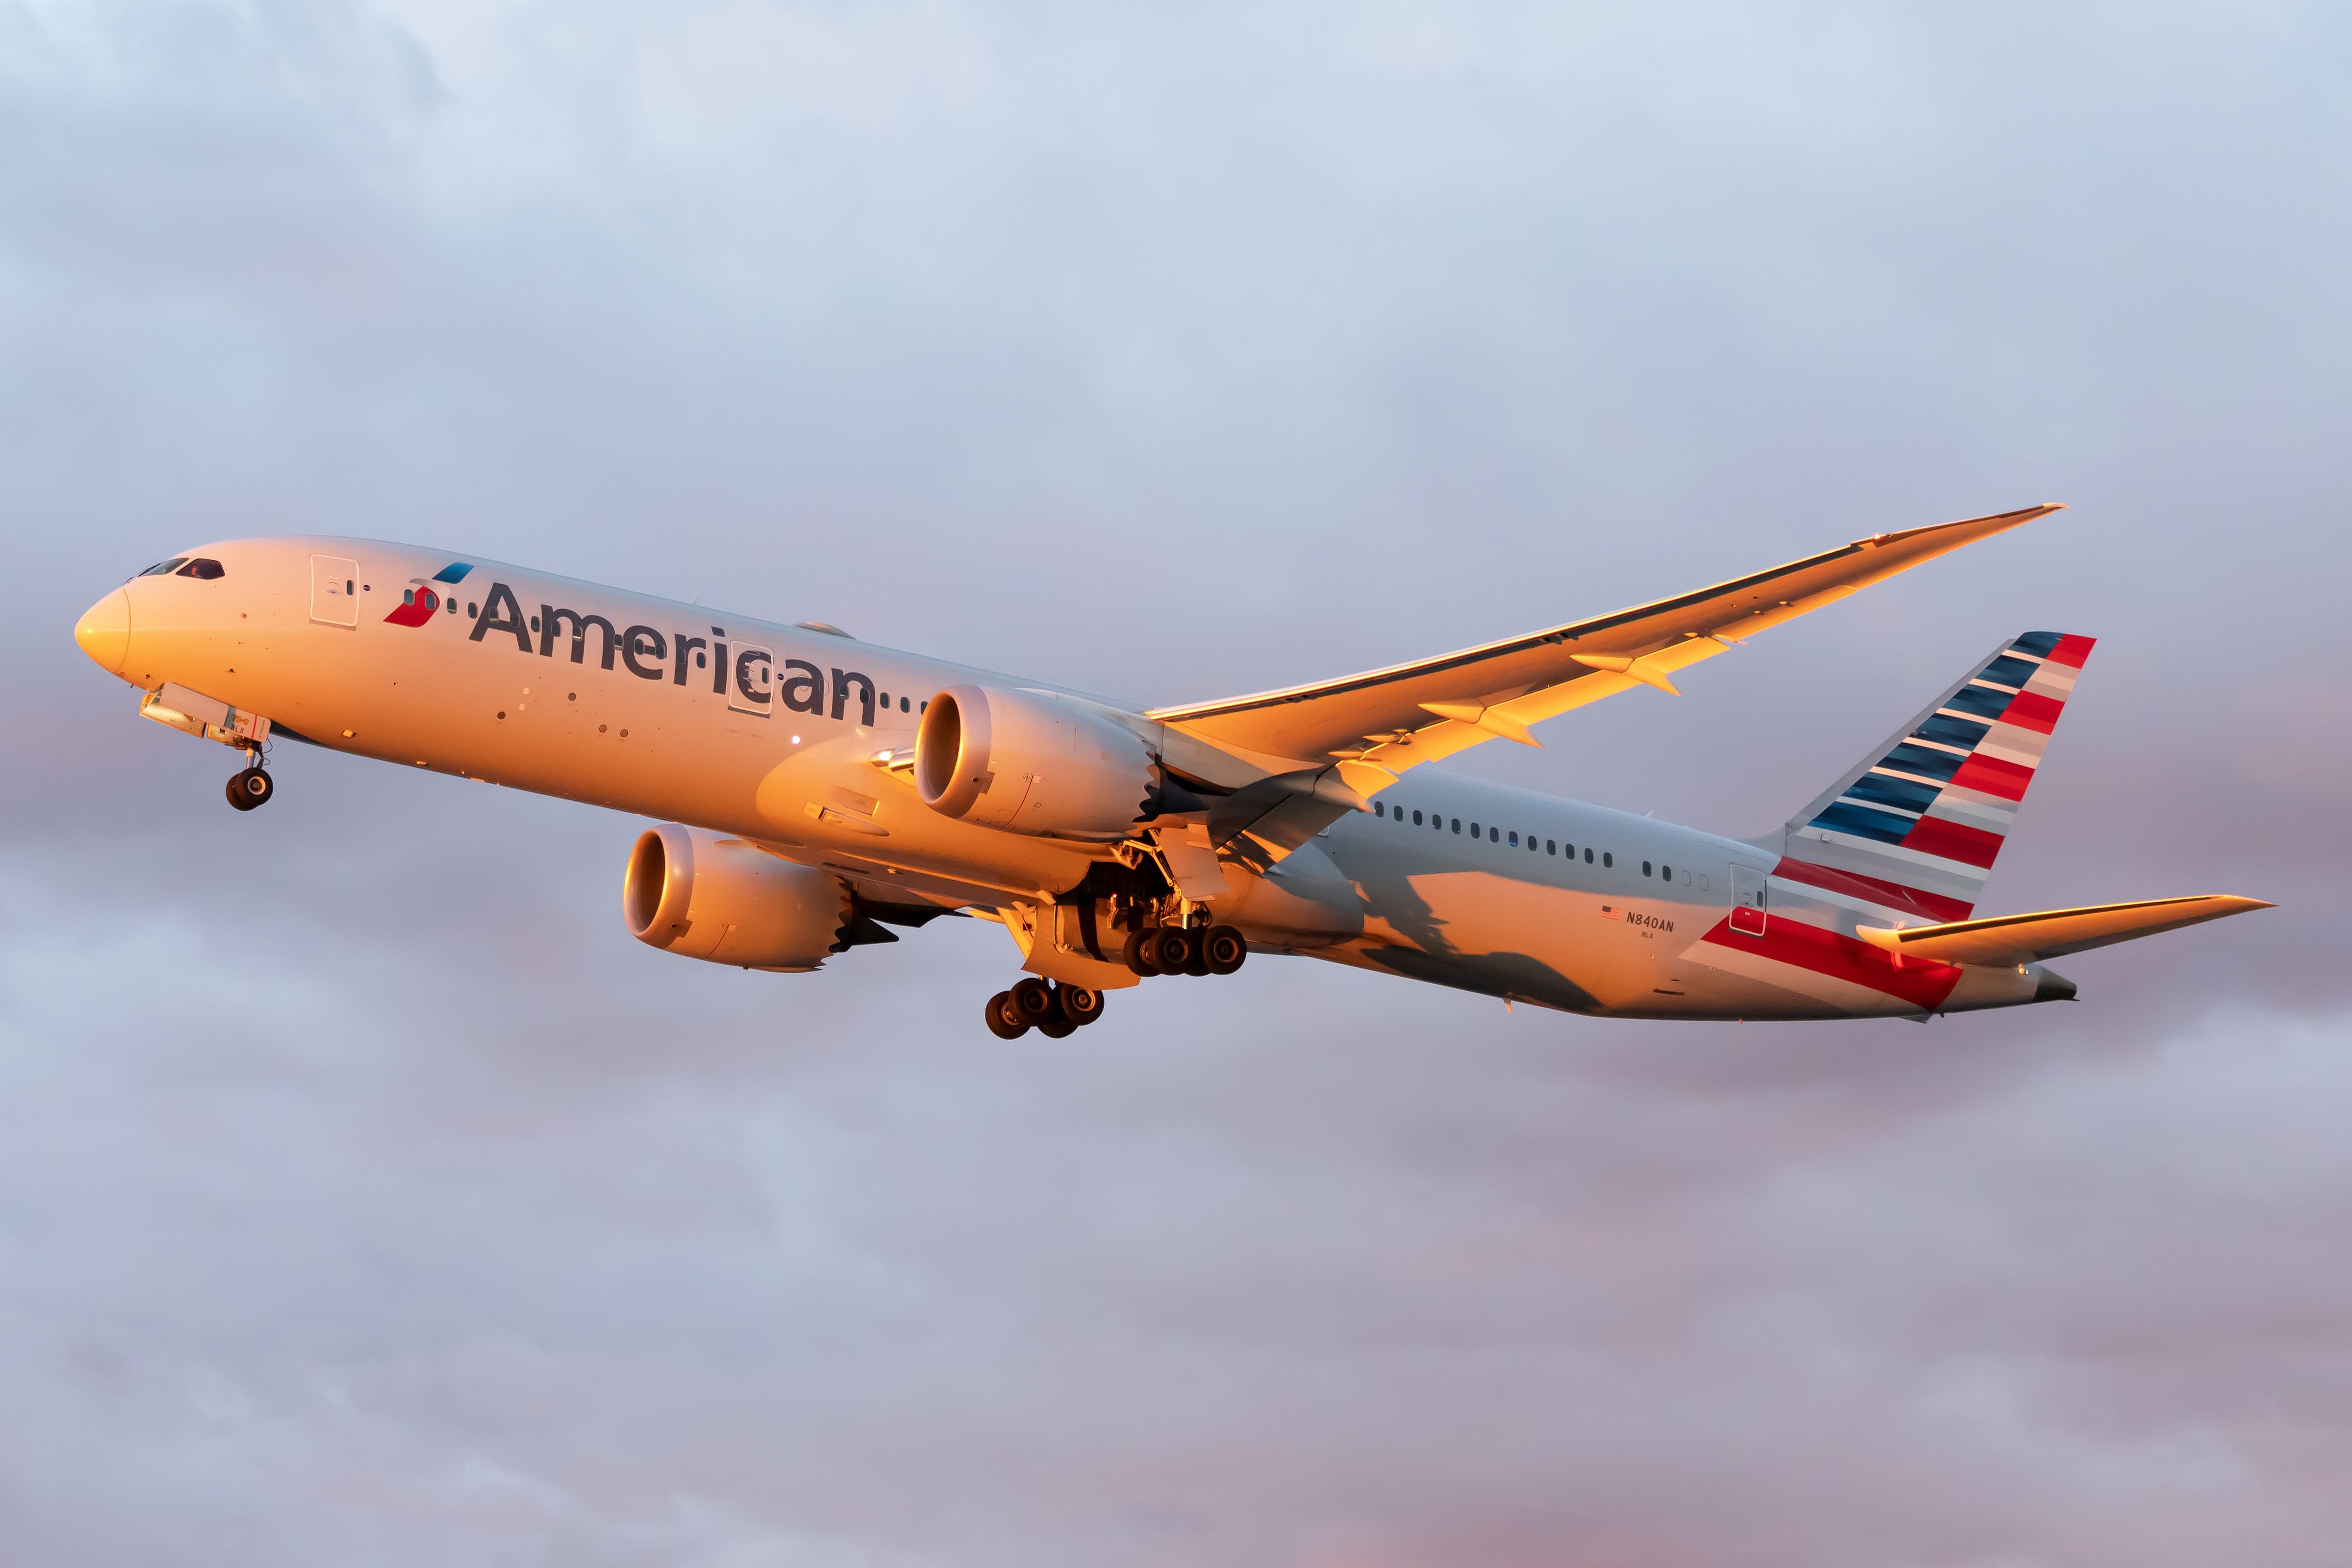 An American Airlines Boeing 787 flying in the sky.